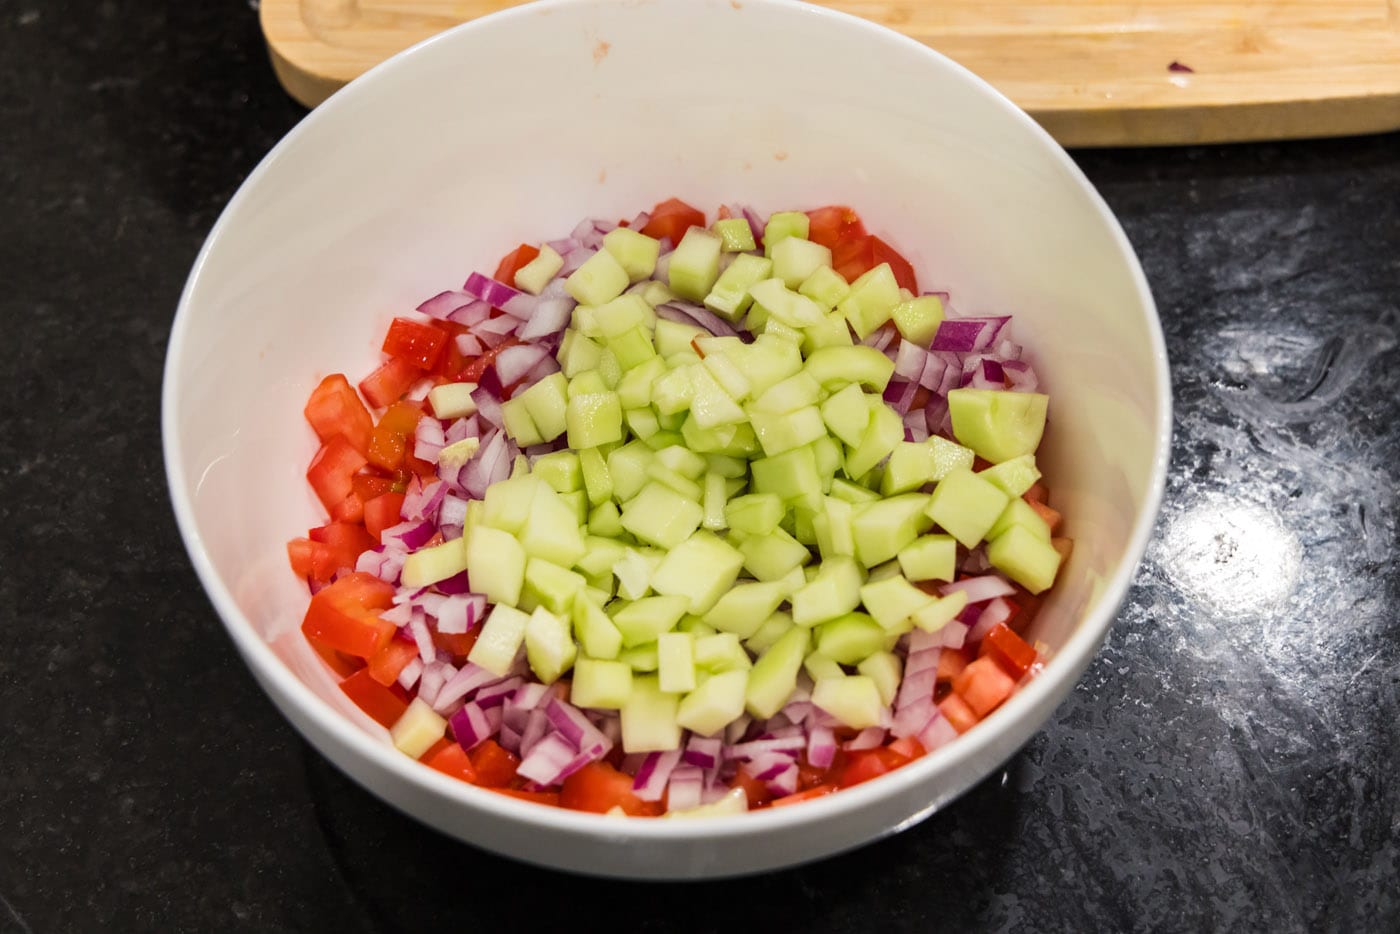 chopped cucumber added to roma tomatoes and red onion